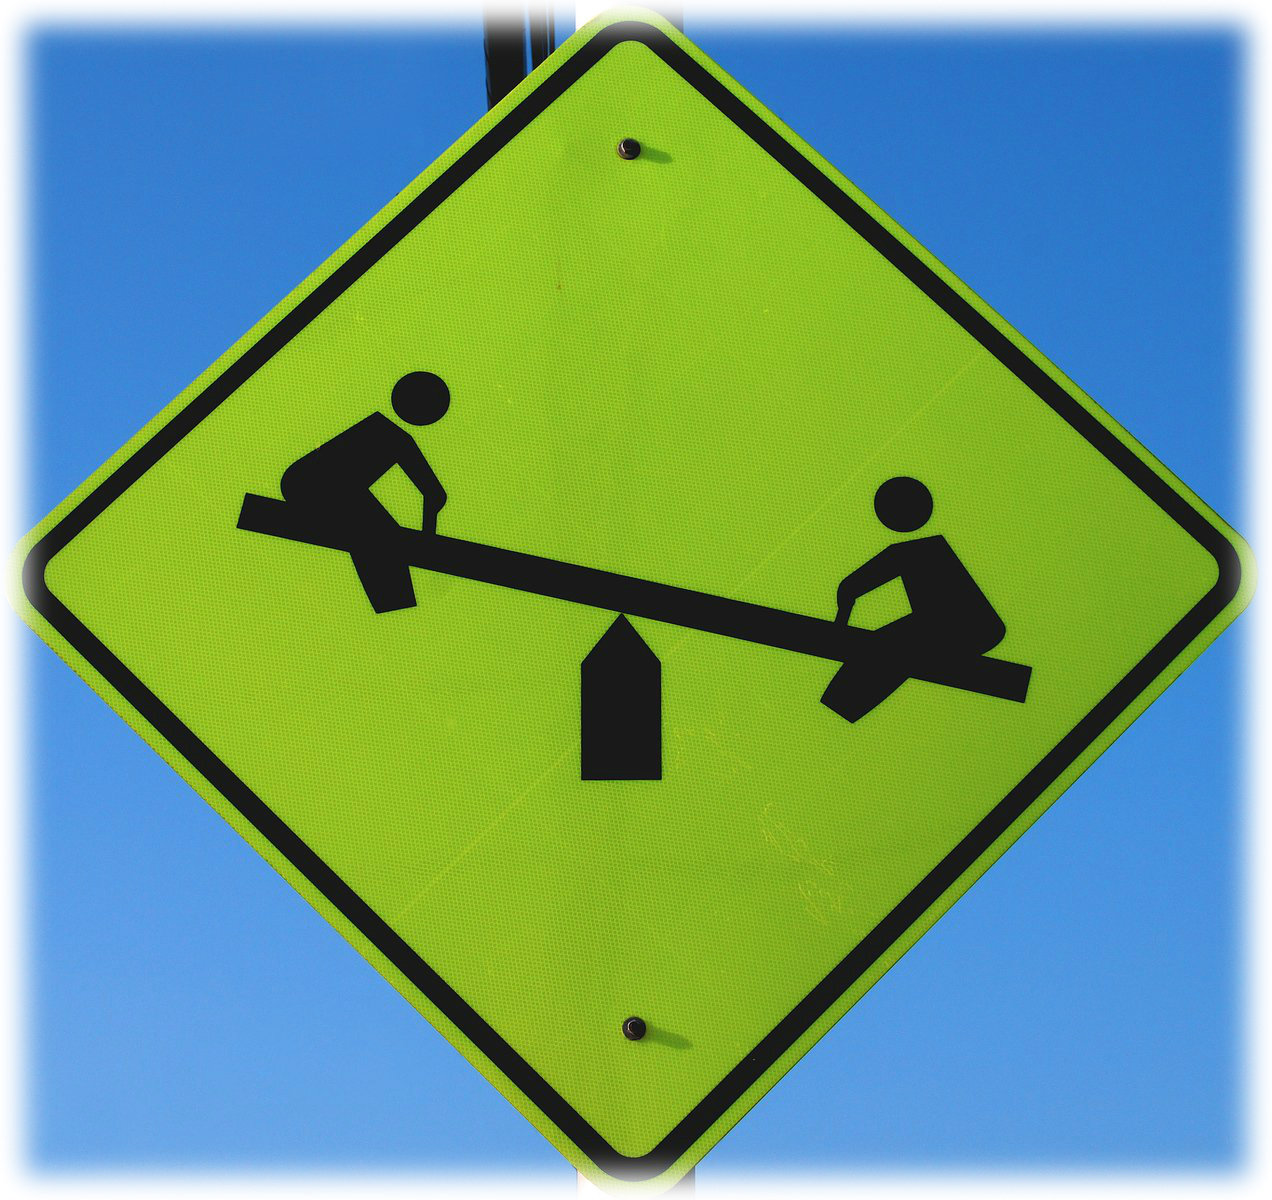 Sign with children on a see-saw